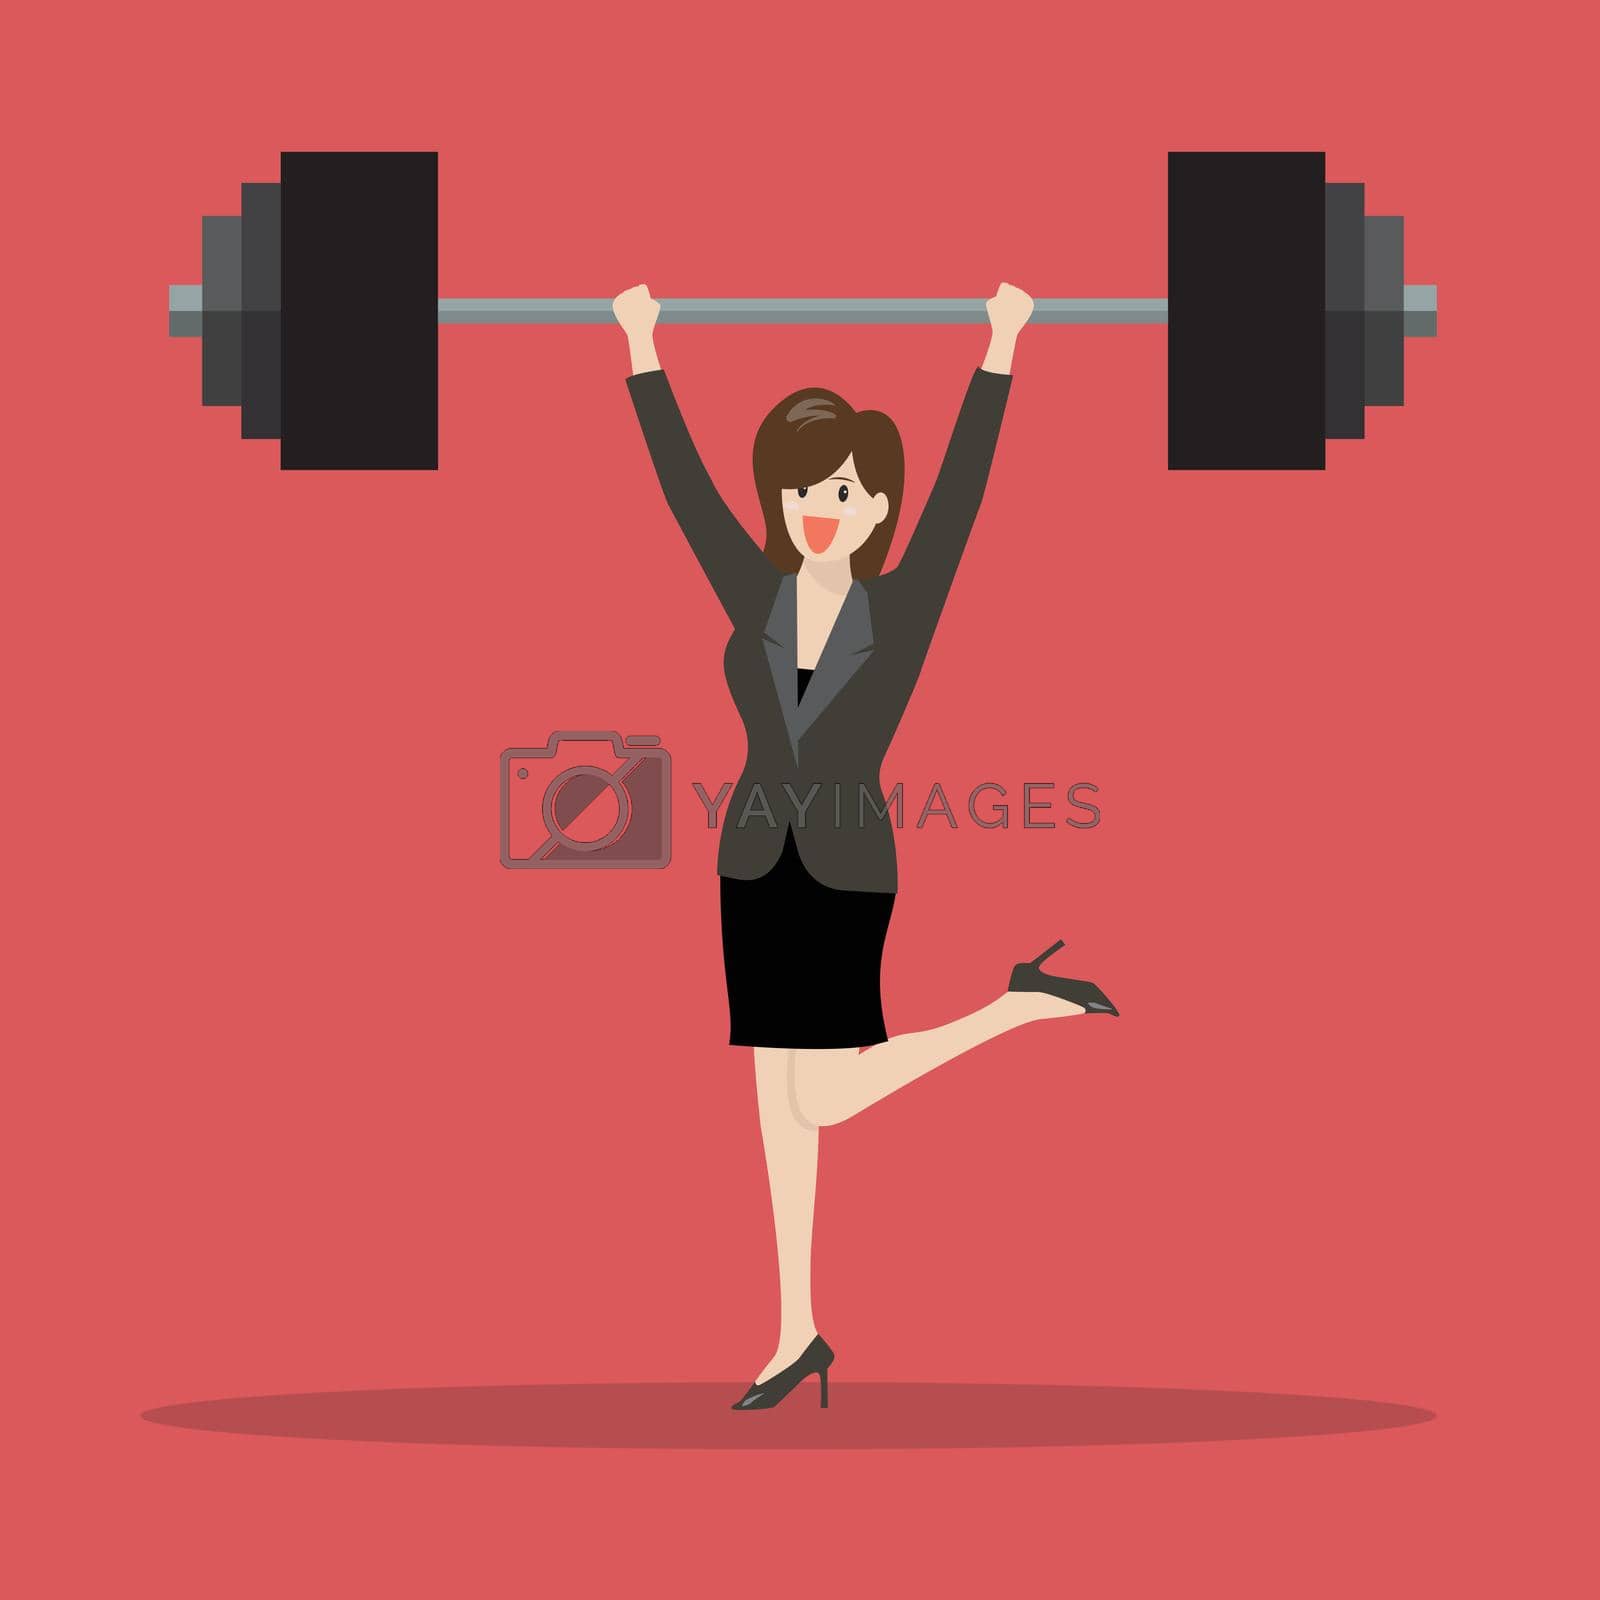 Royalty free image of Business woman lifting a heavy weight by siraanamwong